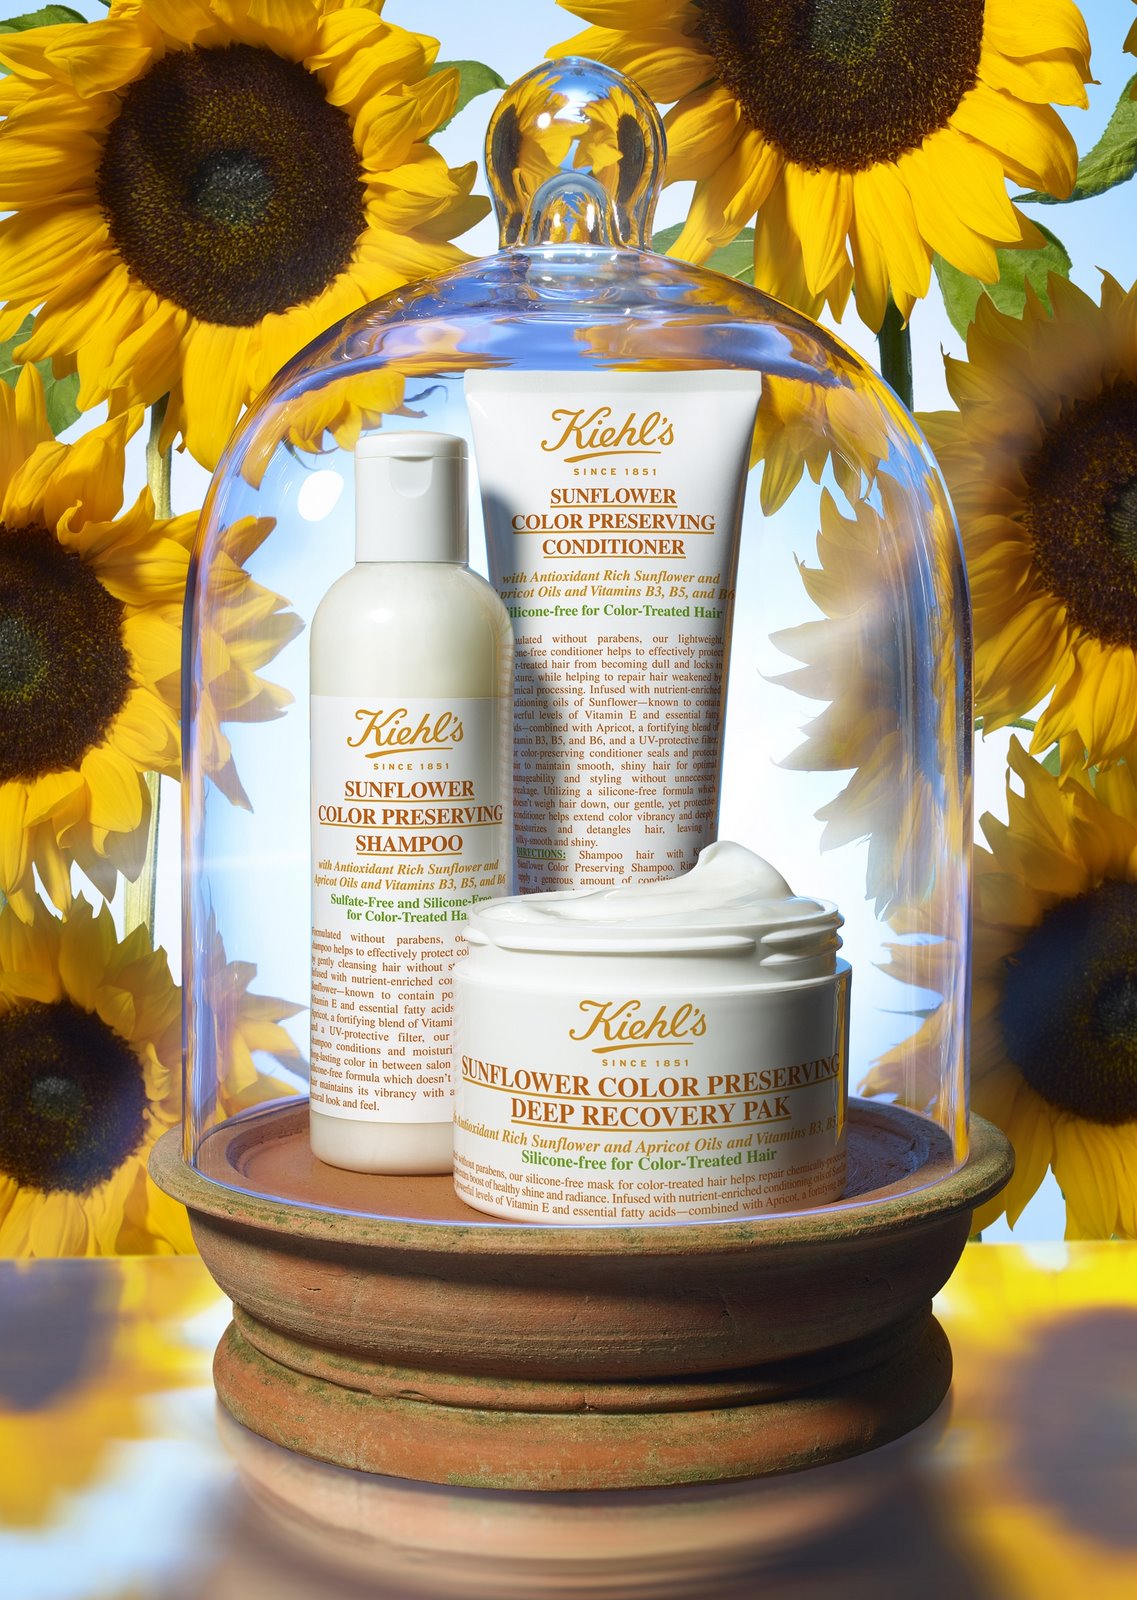 Kiehl's-Sunflower-Color-Preserving-Hair-Care-Collection